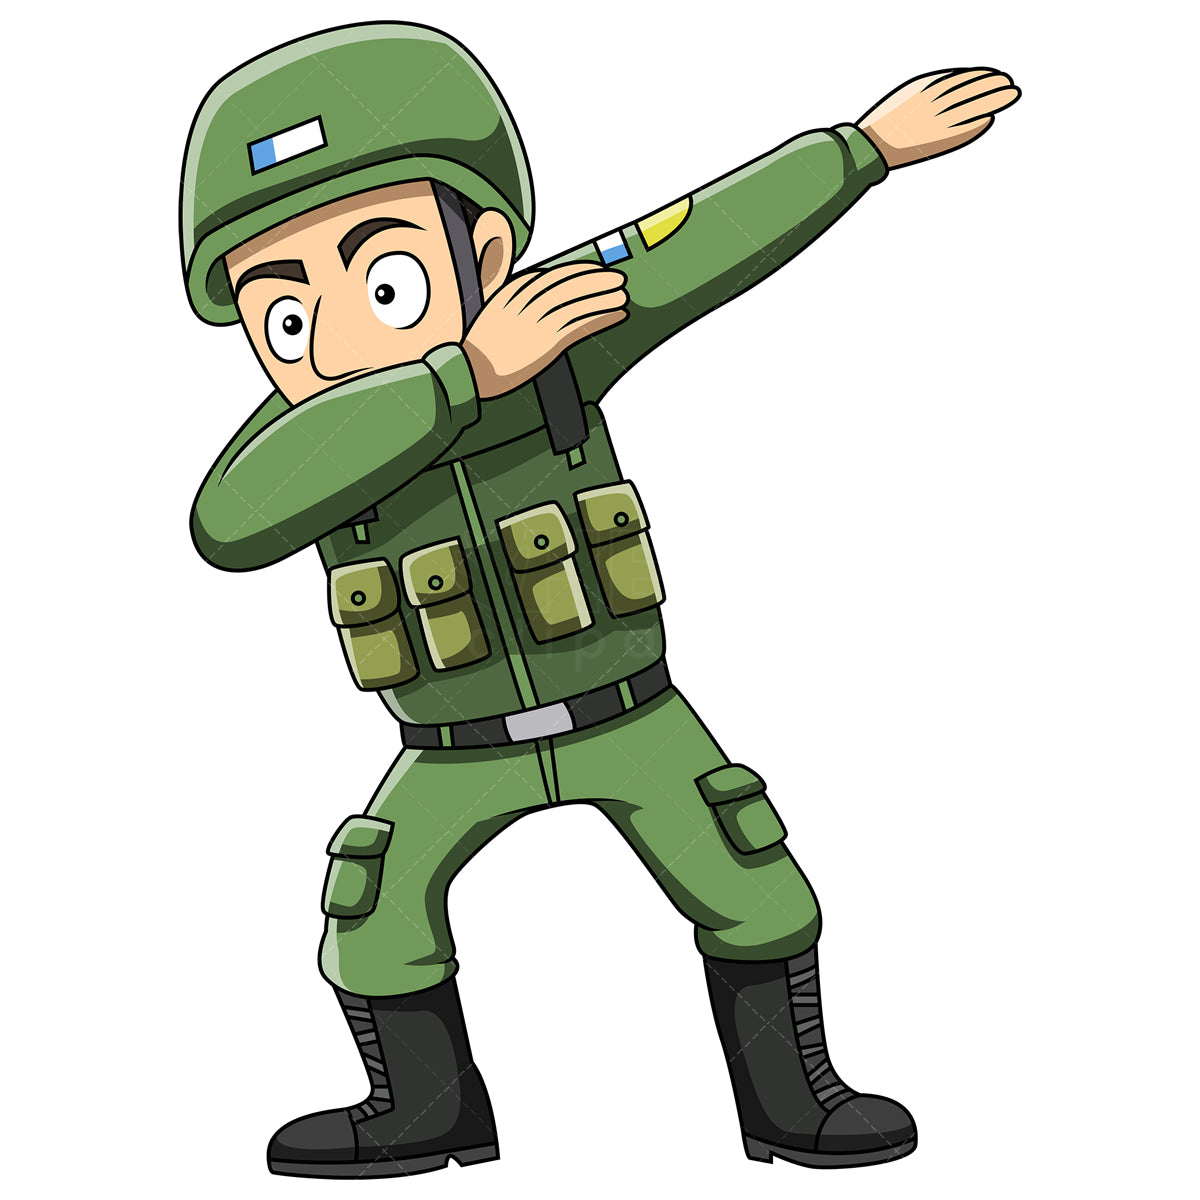 Royalty-free stock vector illustration of a dabbing soldier.